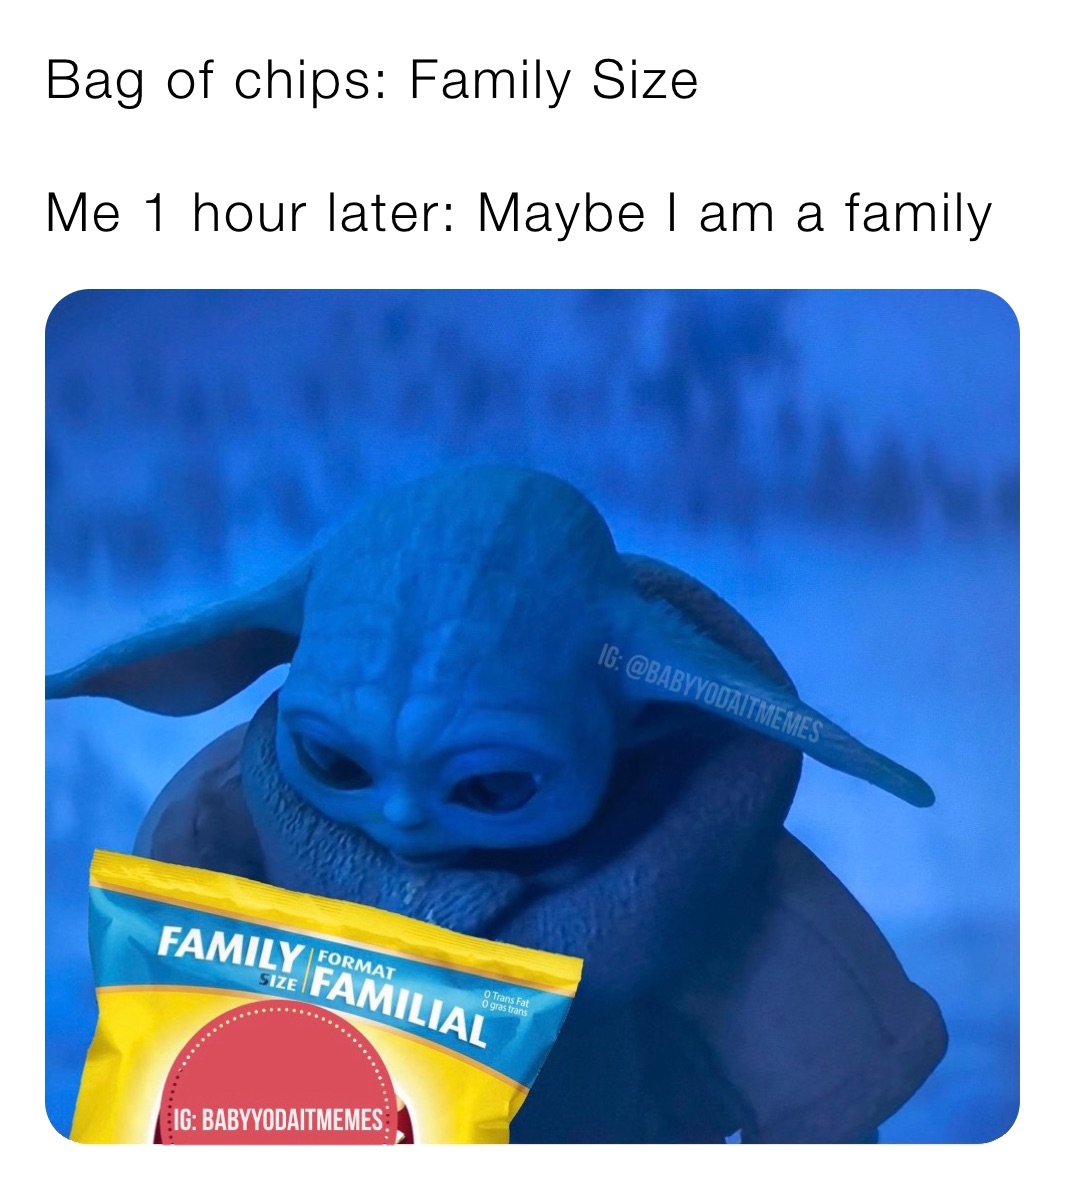 Bag of chips: Family Size

Me 1 hour later: Maybe I am a family